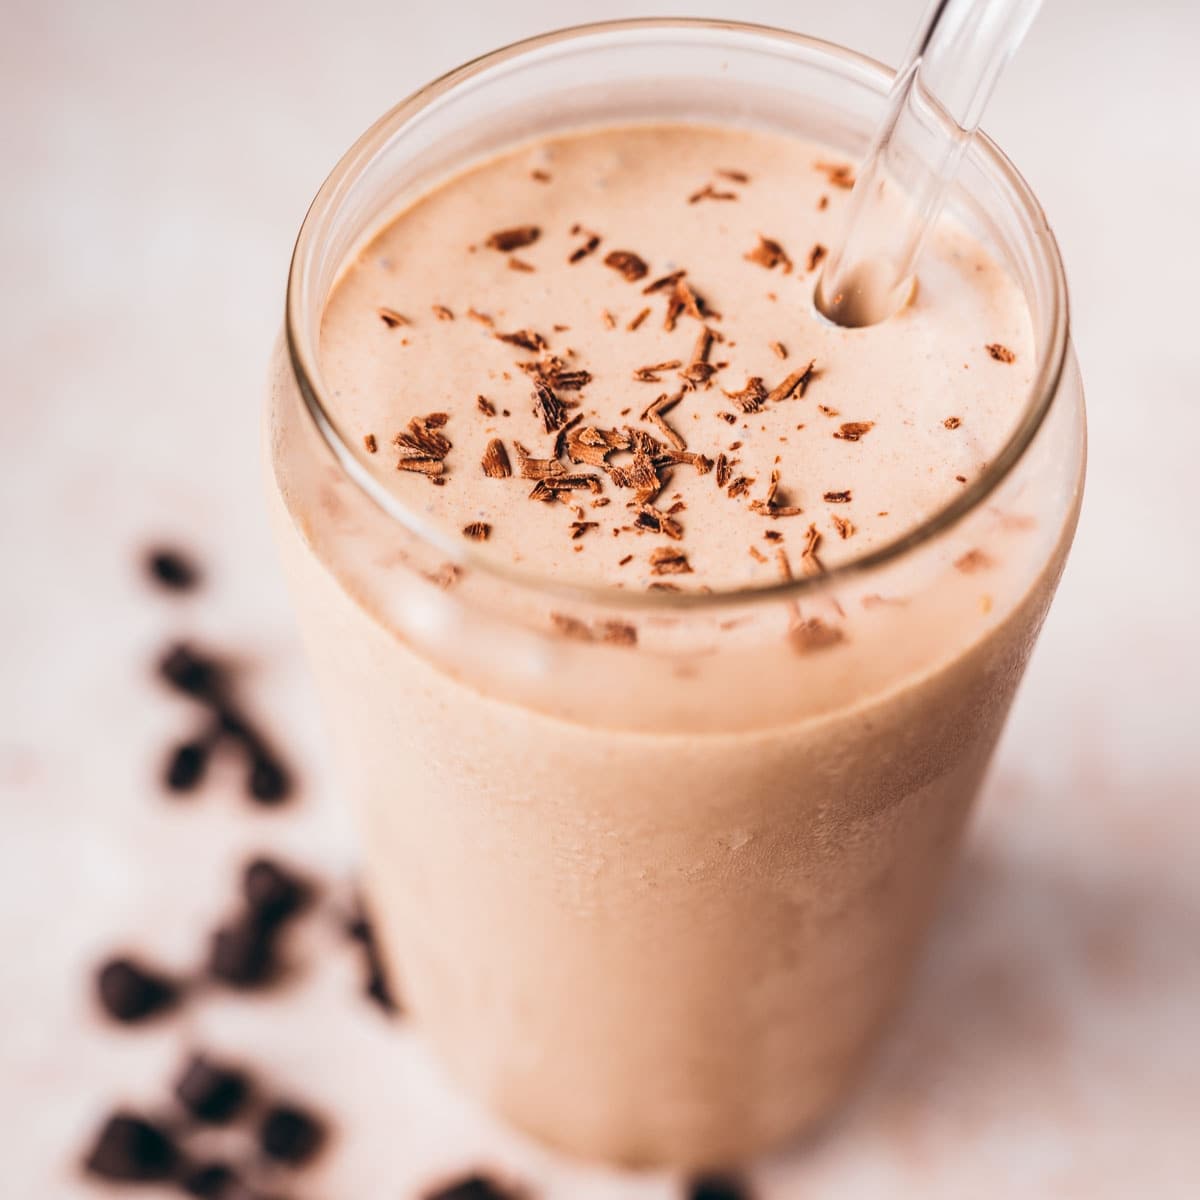 Close shot of a clear glass filled with light brown drink garnished with shaved chocolate.